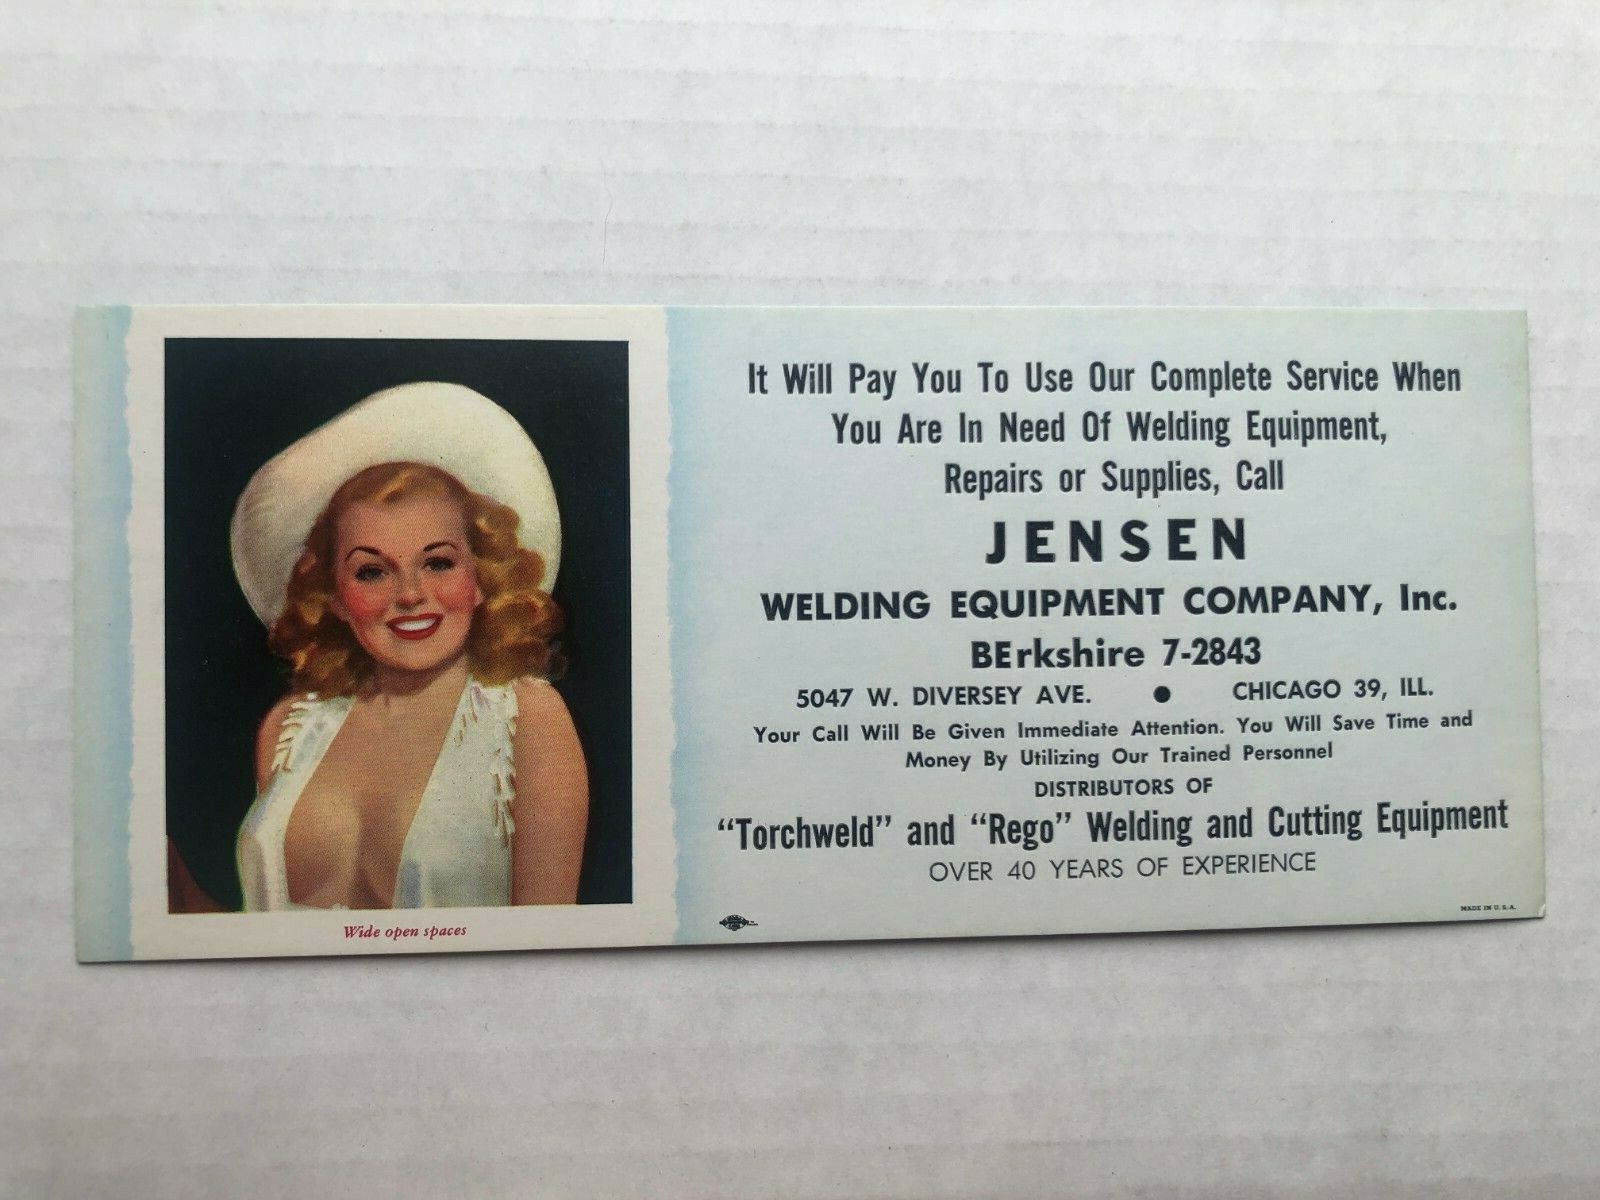 Vintage 1950's Pinup Girl Advertising Blotter w/ Sexy Blond Cowgirl